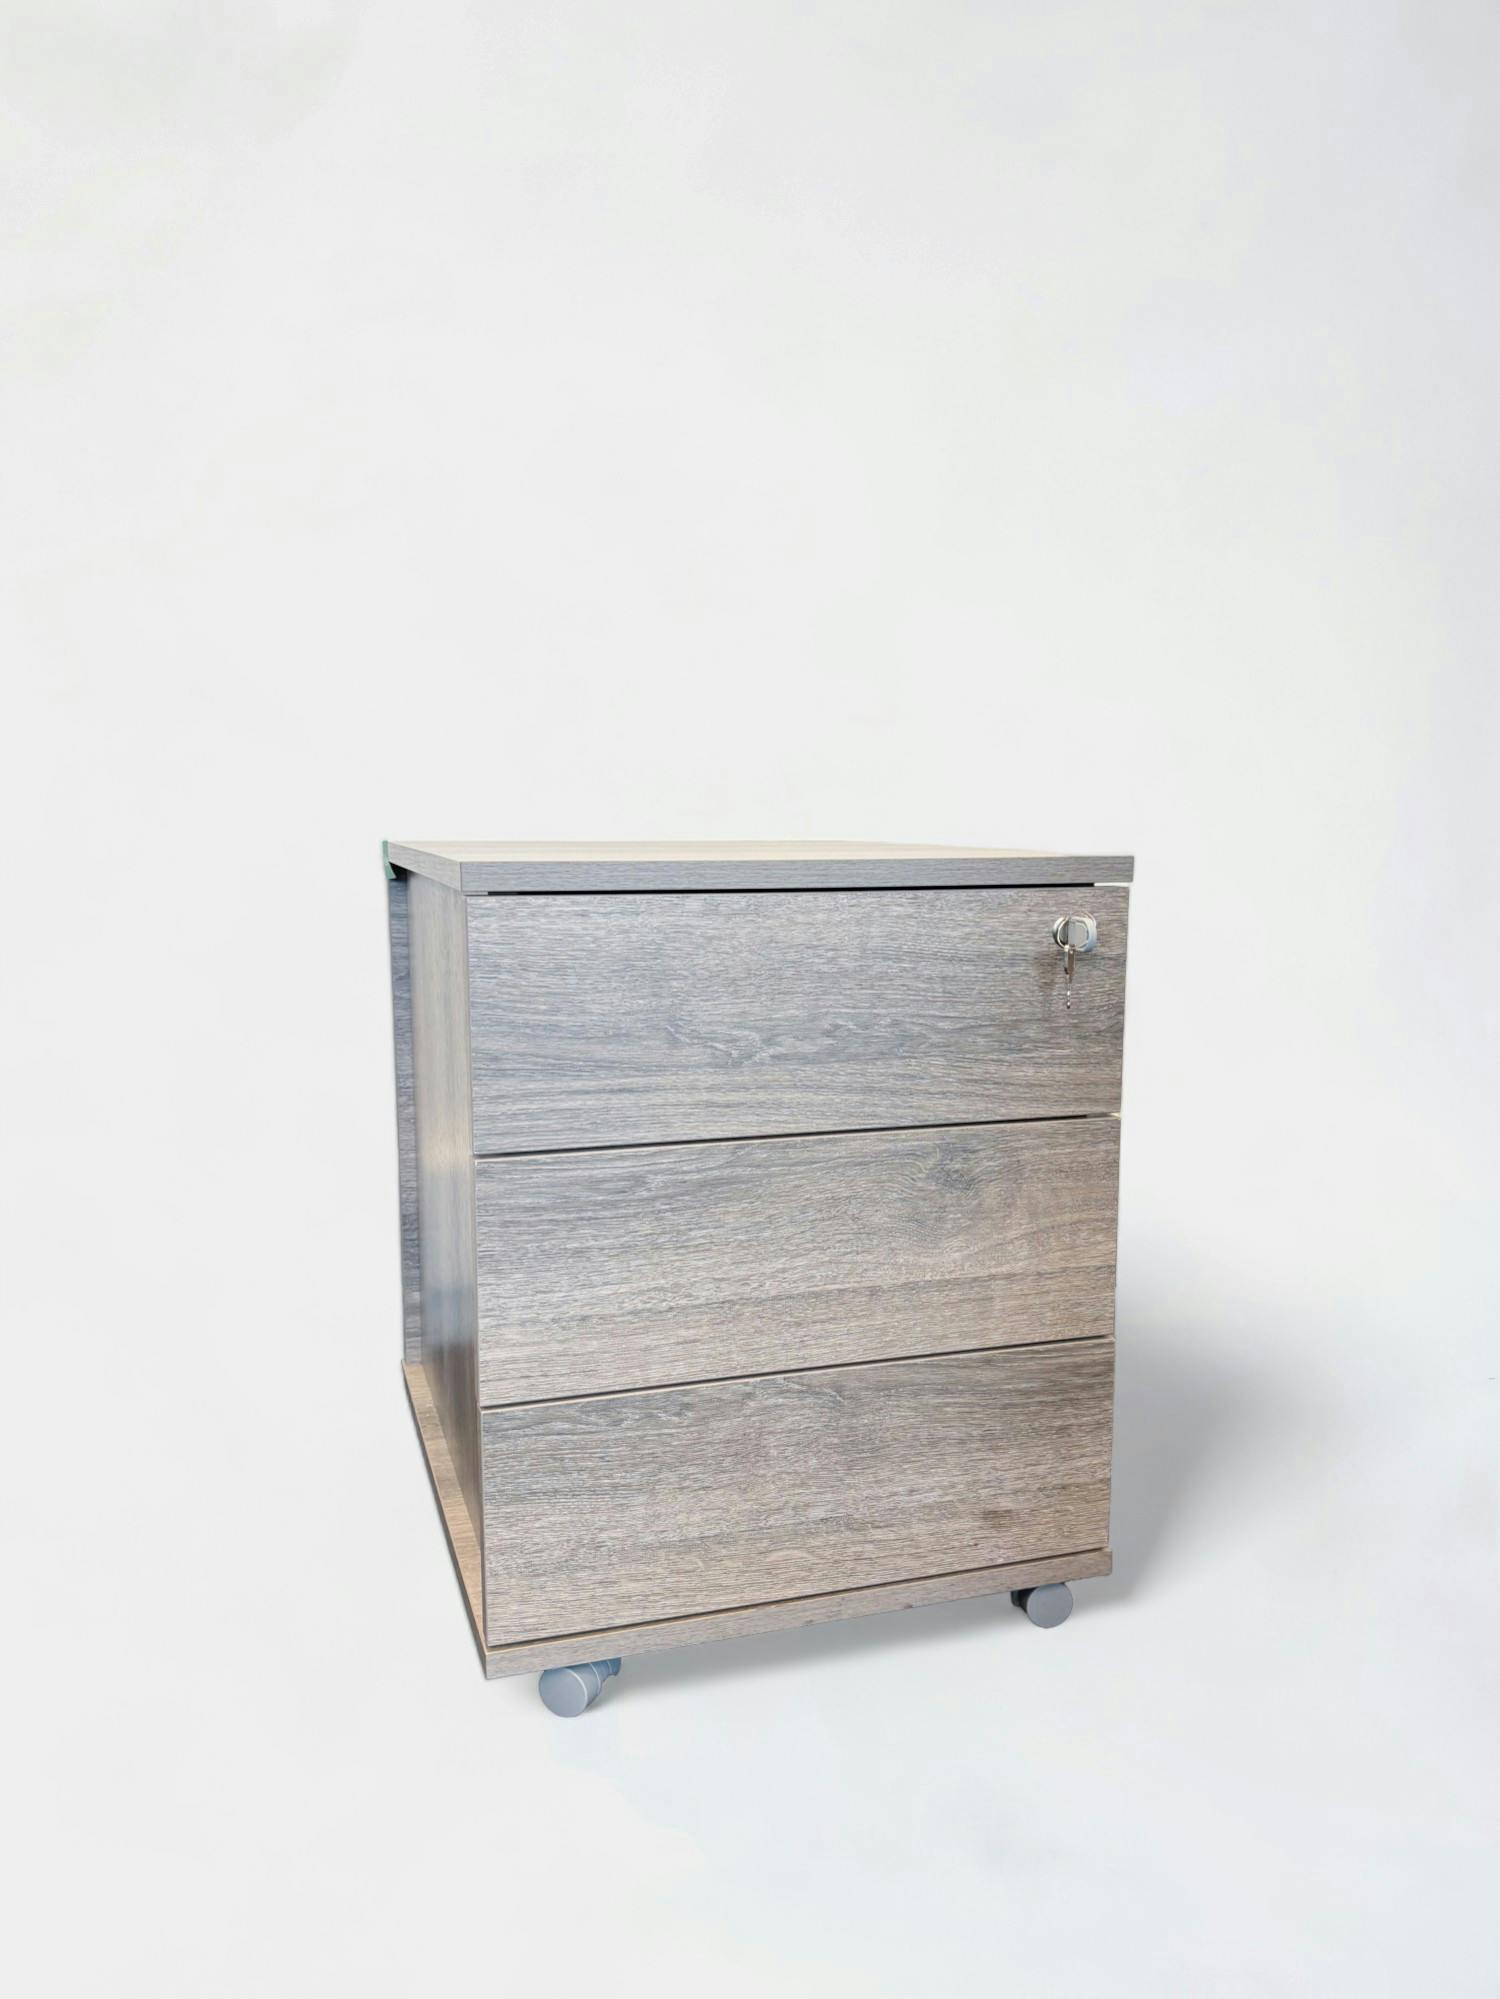 Light Oak WoodEffect Mobile Pedestal Cabinet with Lock and Casters - Relieve Furniture